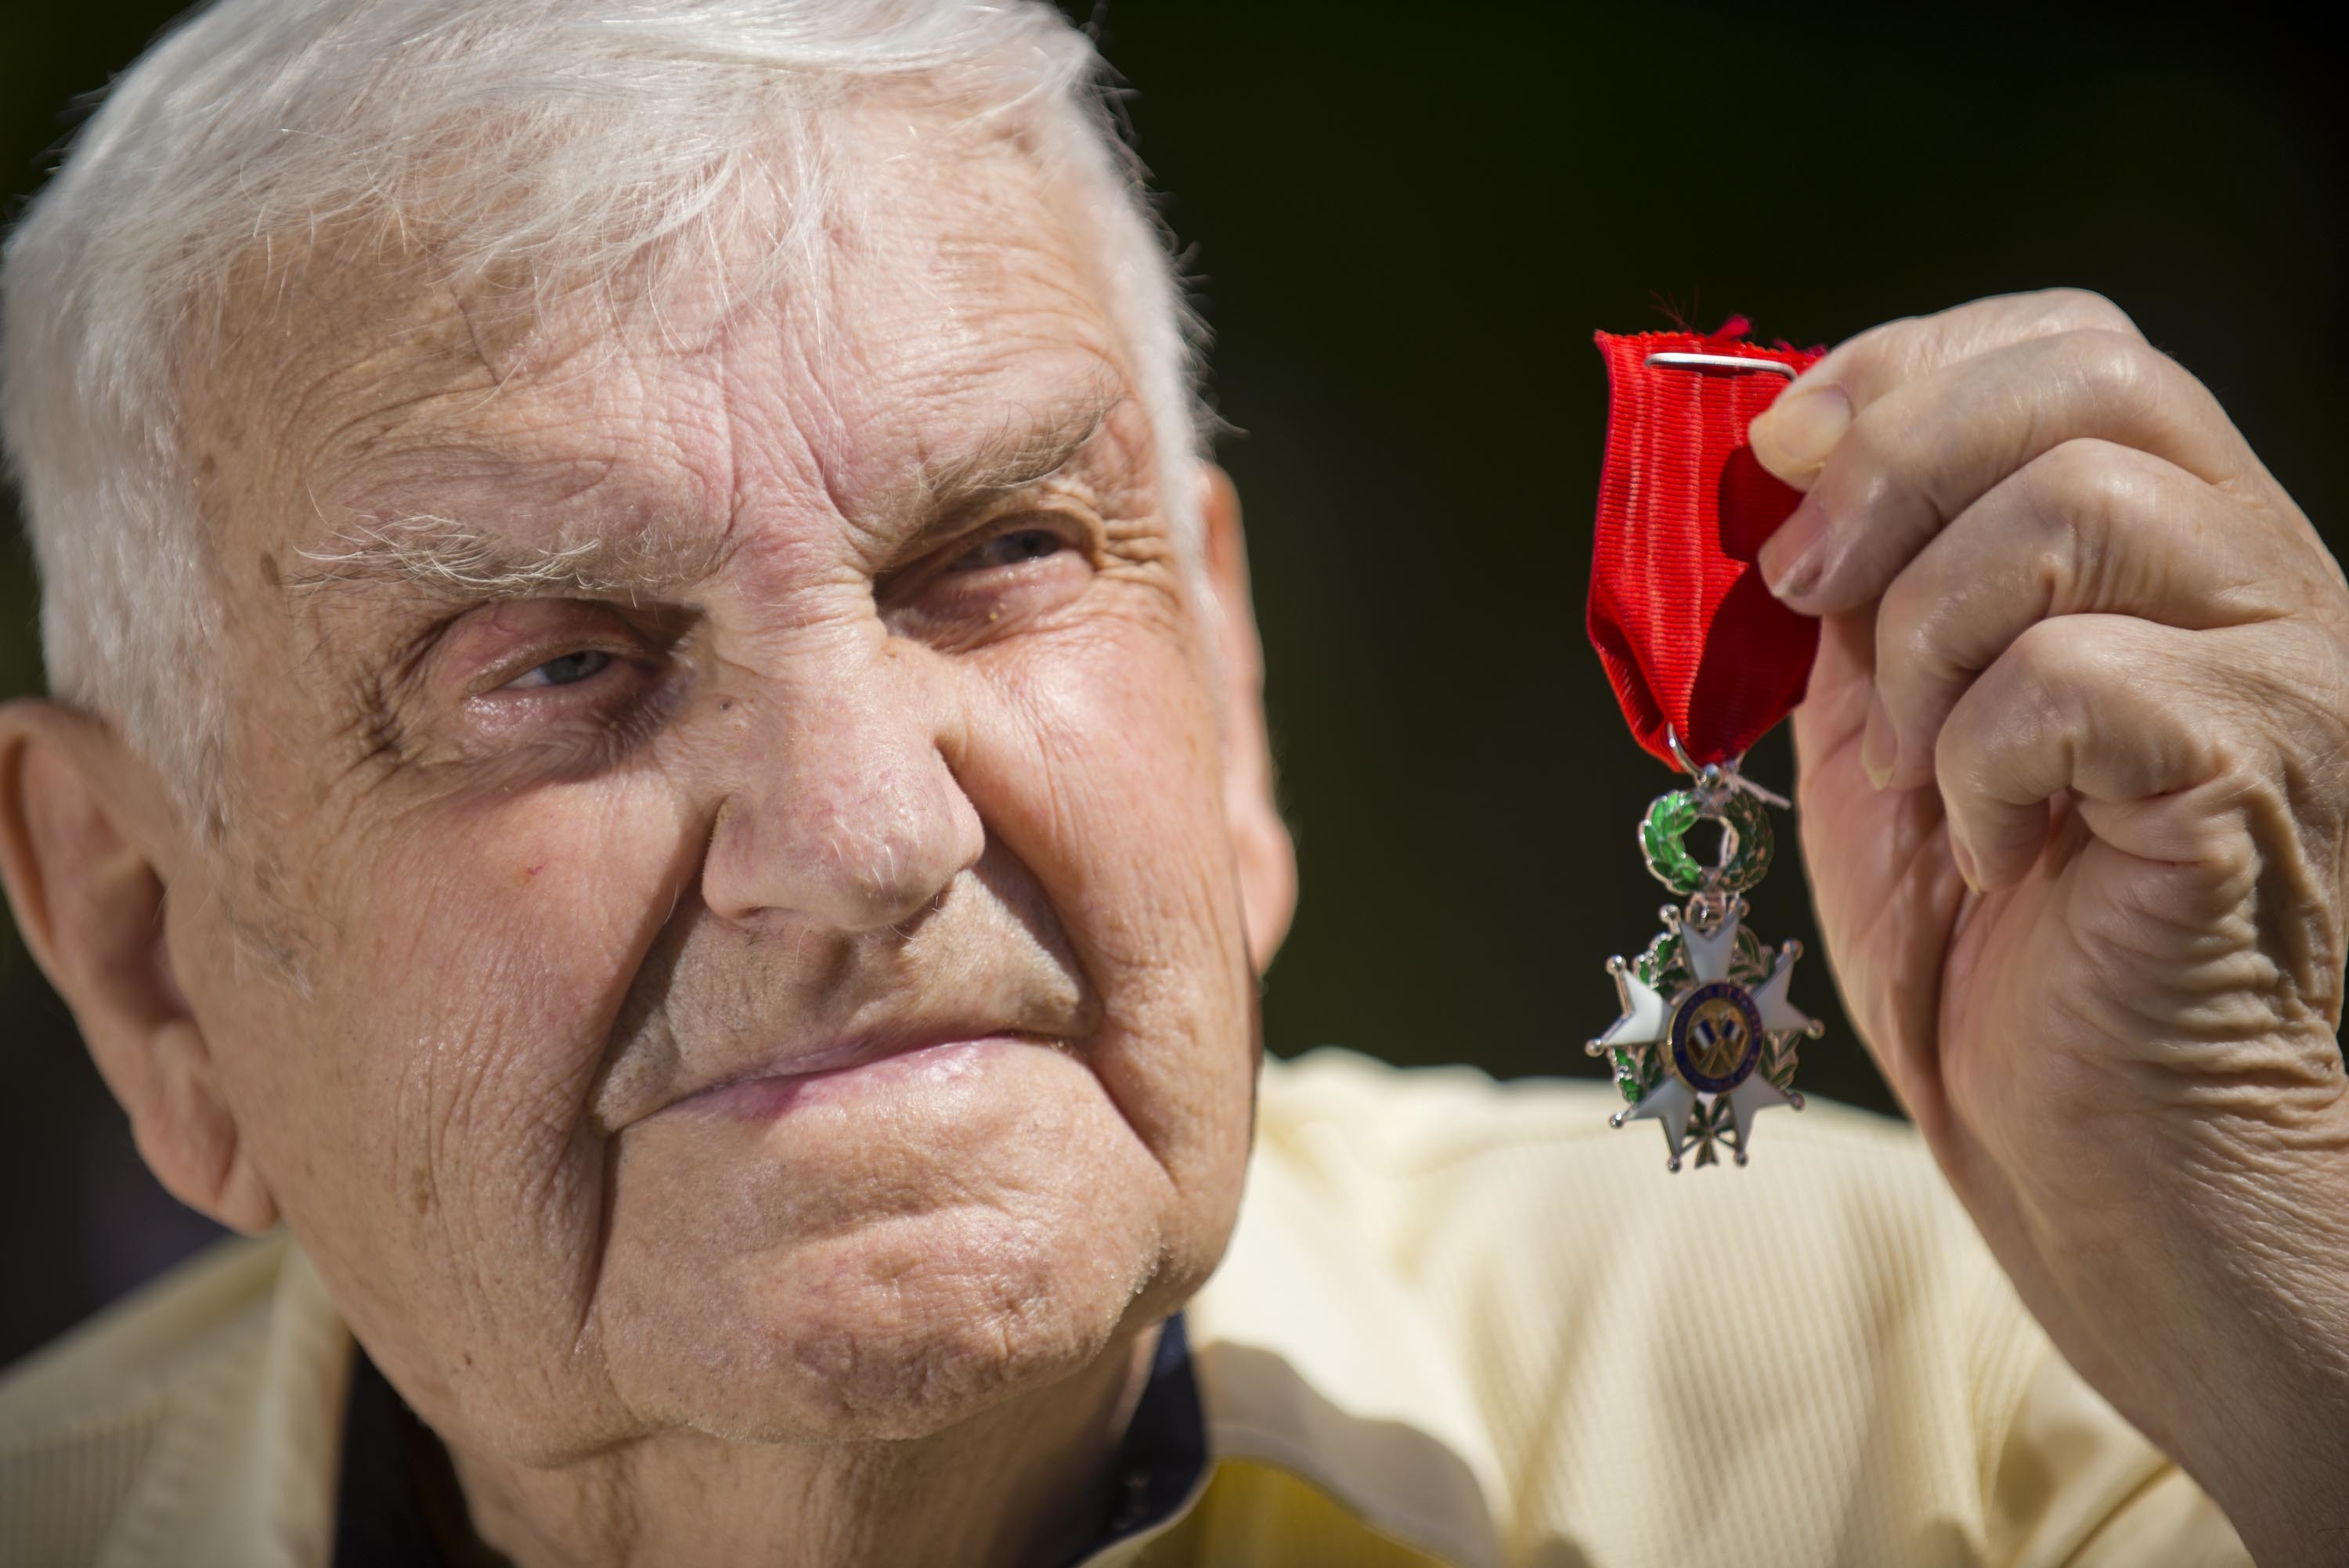 John Smith was part of the merchant navy that supported the armed forces for the D-Day landings in World War II